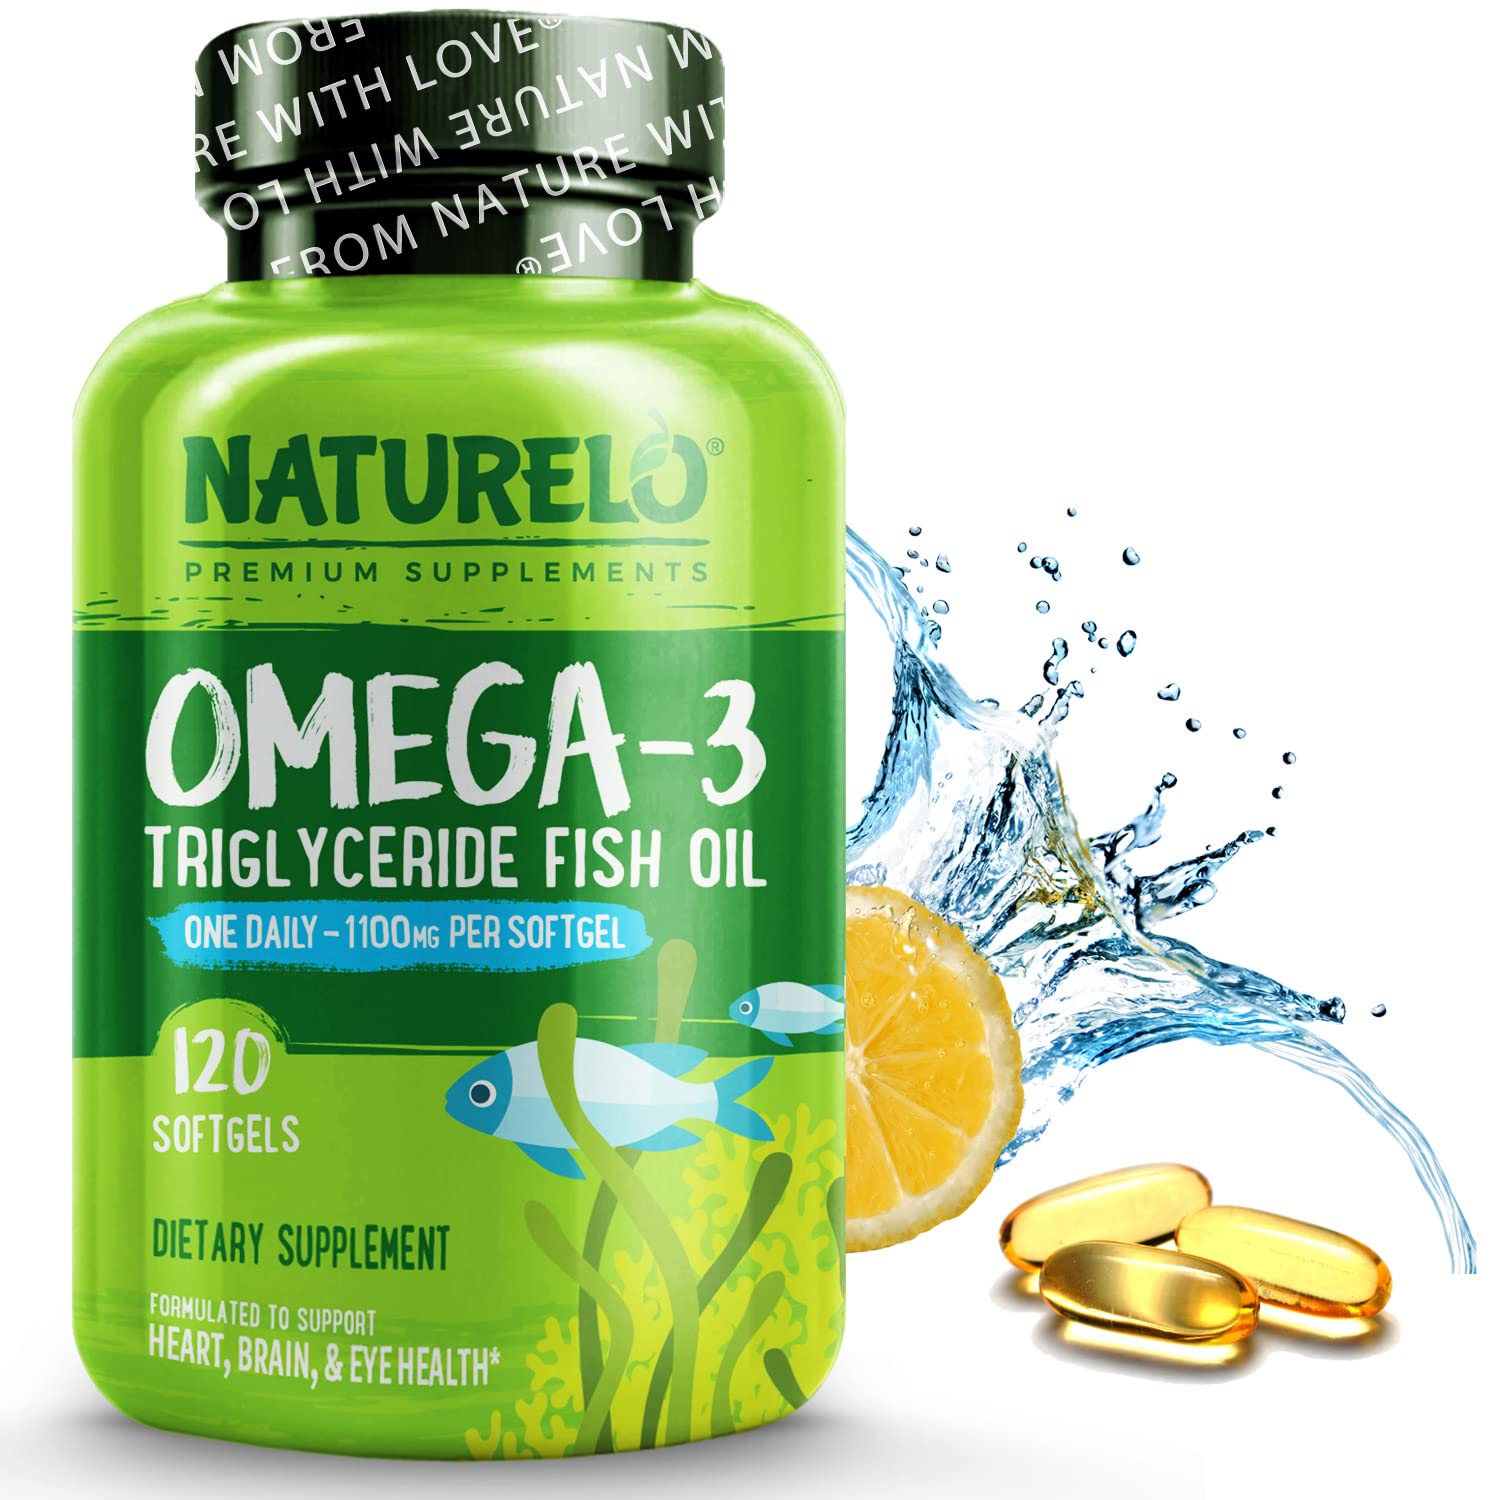 Book Cover NATURELO Omega-3 Fish Oil Supplement - EPA + DHA - 1100 mg Triglyceride Omega-3 per Gel - One A Day - for Heart, Eye, Brain, Joint Health - No Burps - Lemon Flavor - 120 Softgels | 4 Month Supply